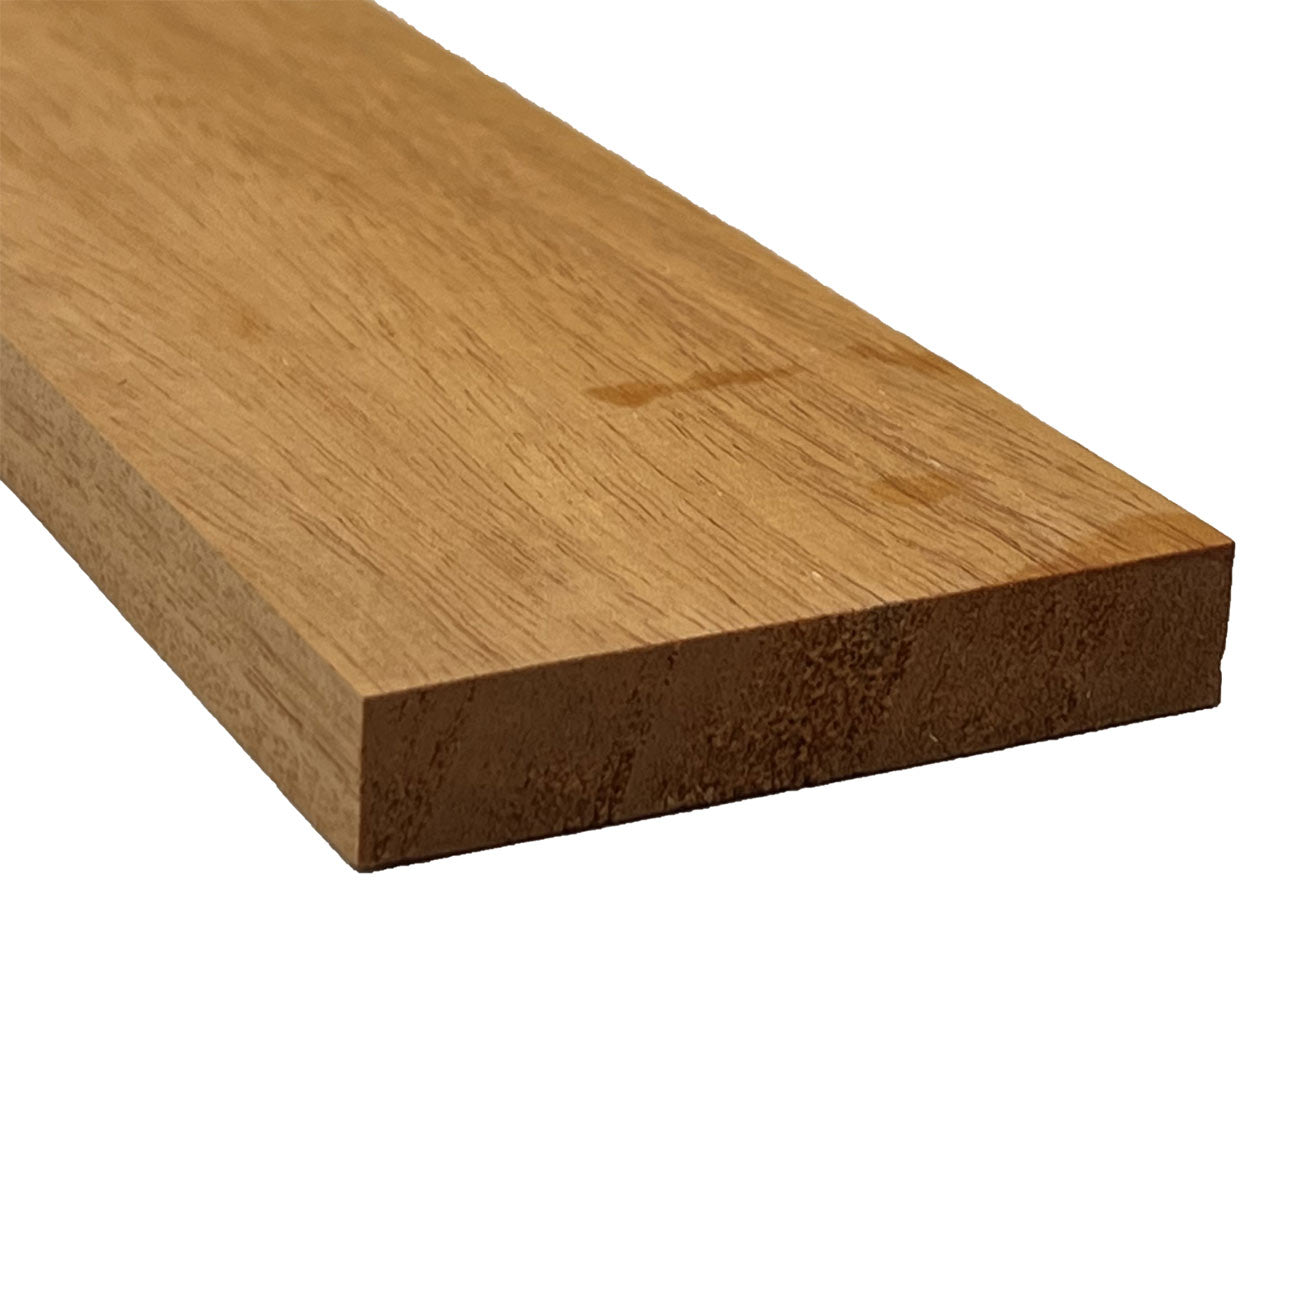 Combo Pack Of 10, Fijian Mahogany Thin Stock Lumber Boards Wood Crafts, 21&quot; x 2-3/4&quot; x 1/2&quot; - Exotic Wood Zone - Buy online Across USA 